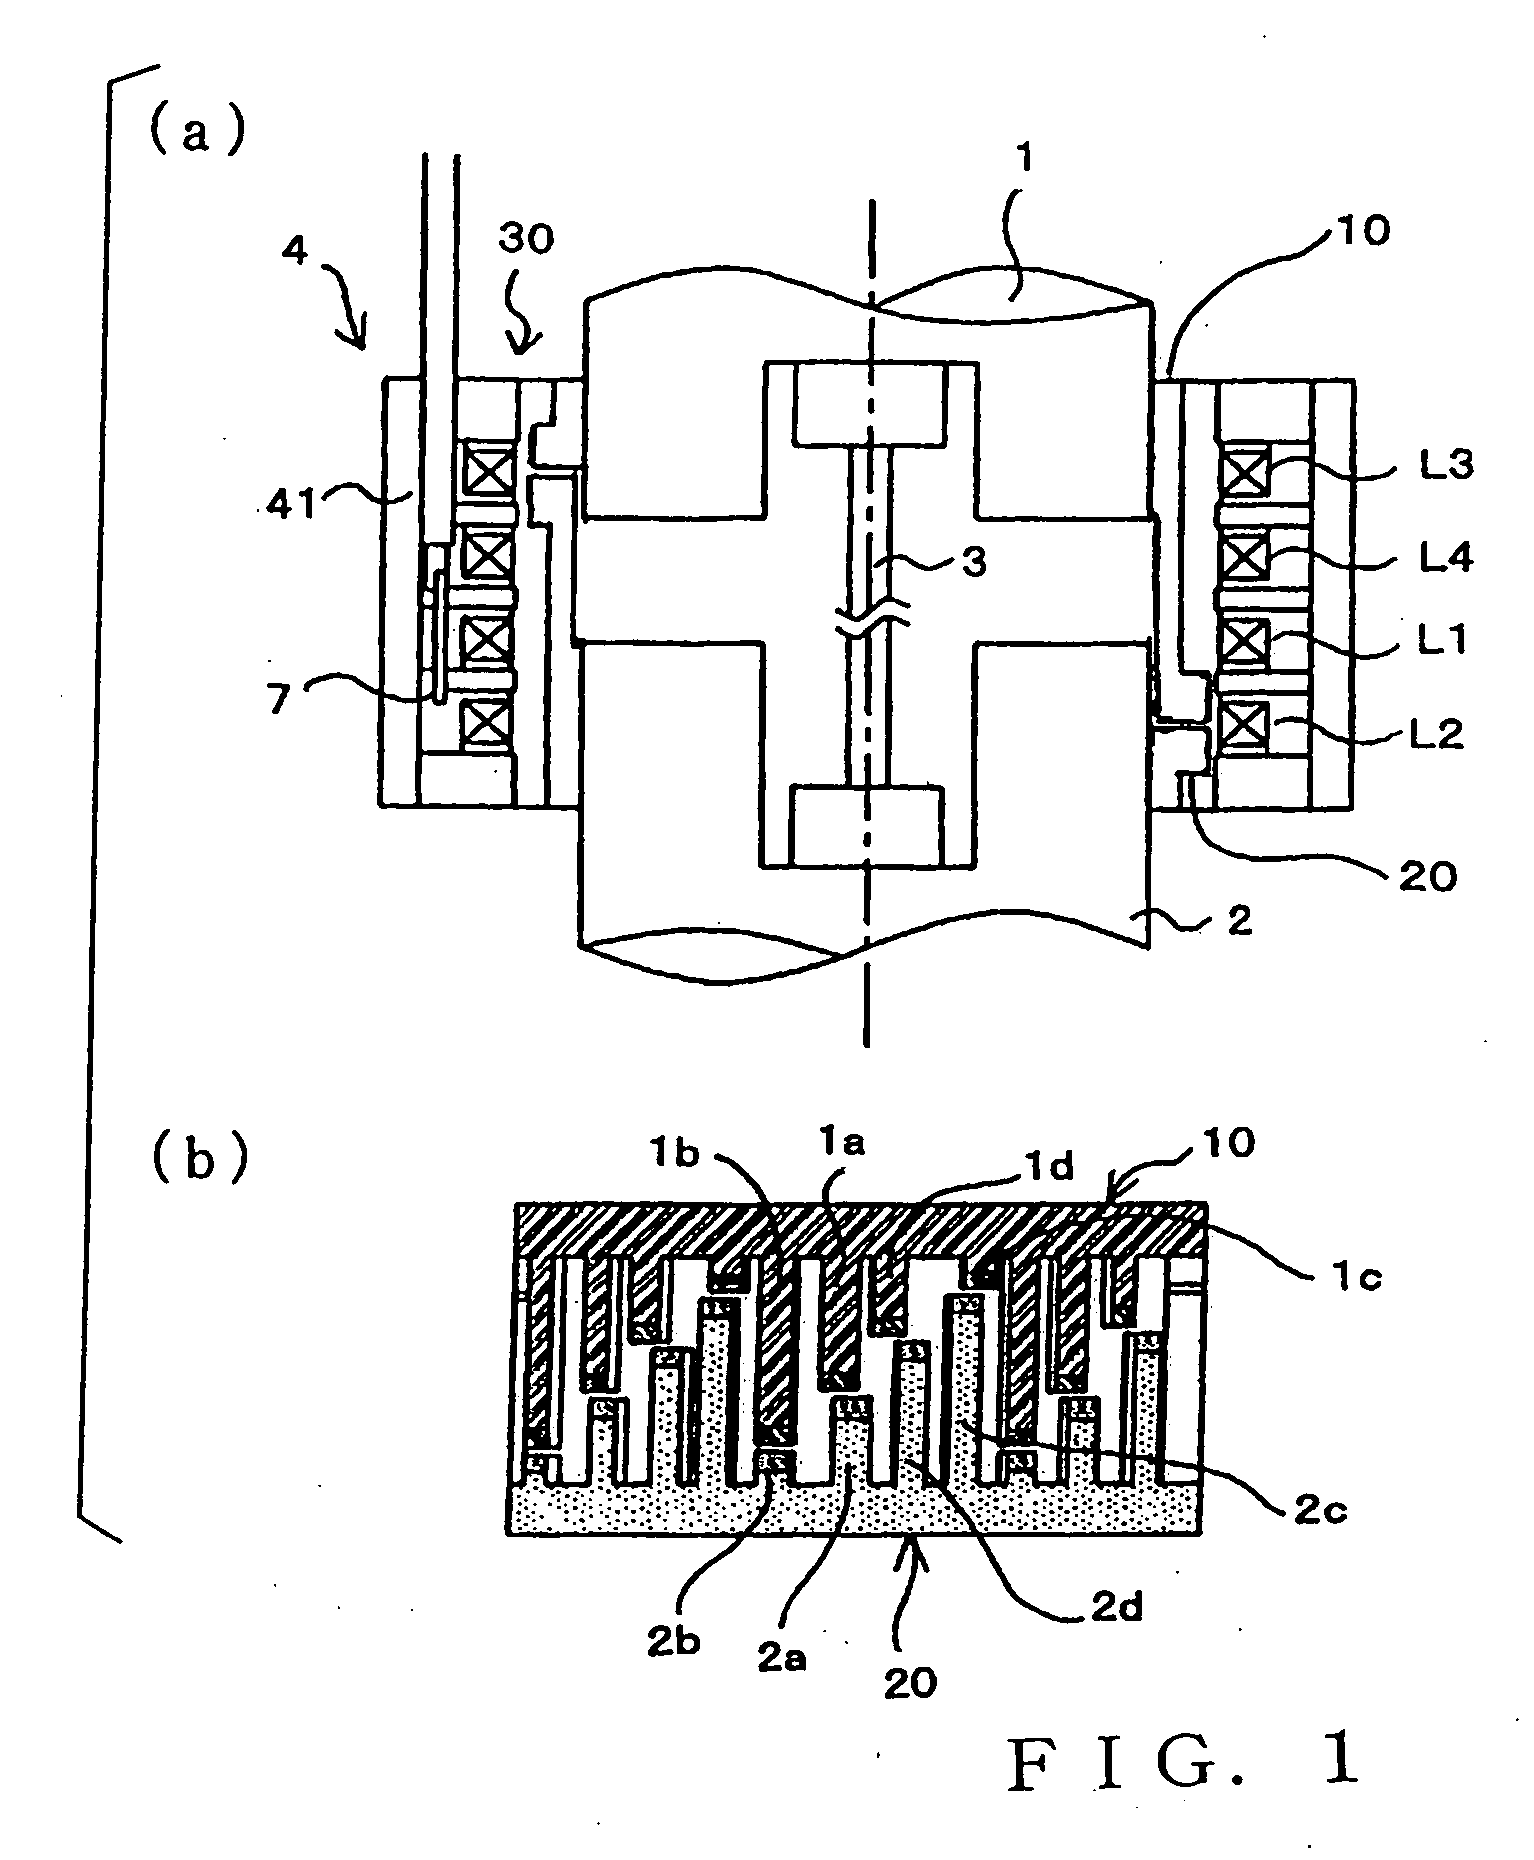 Relative rotational position-detection device